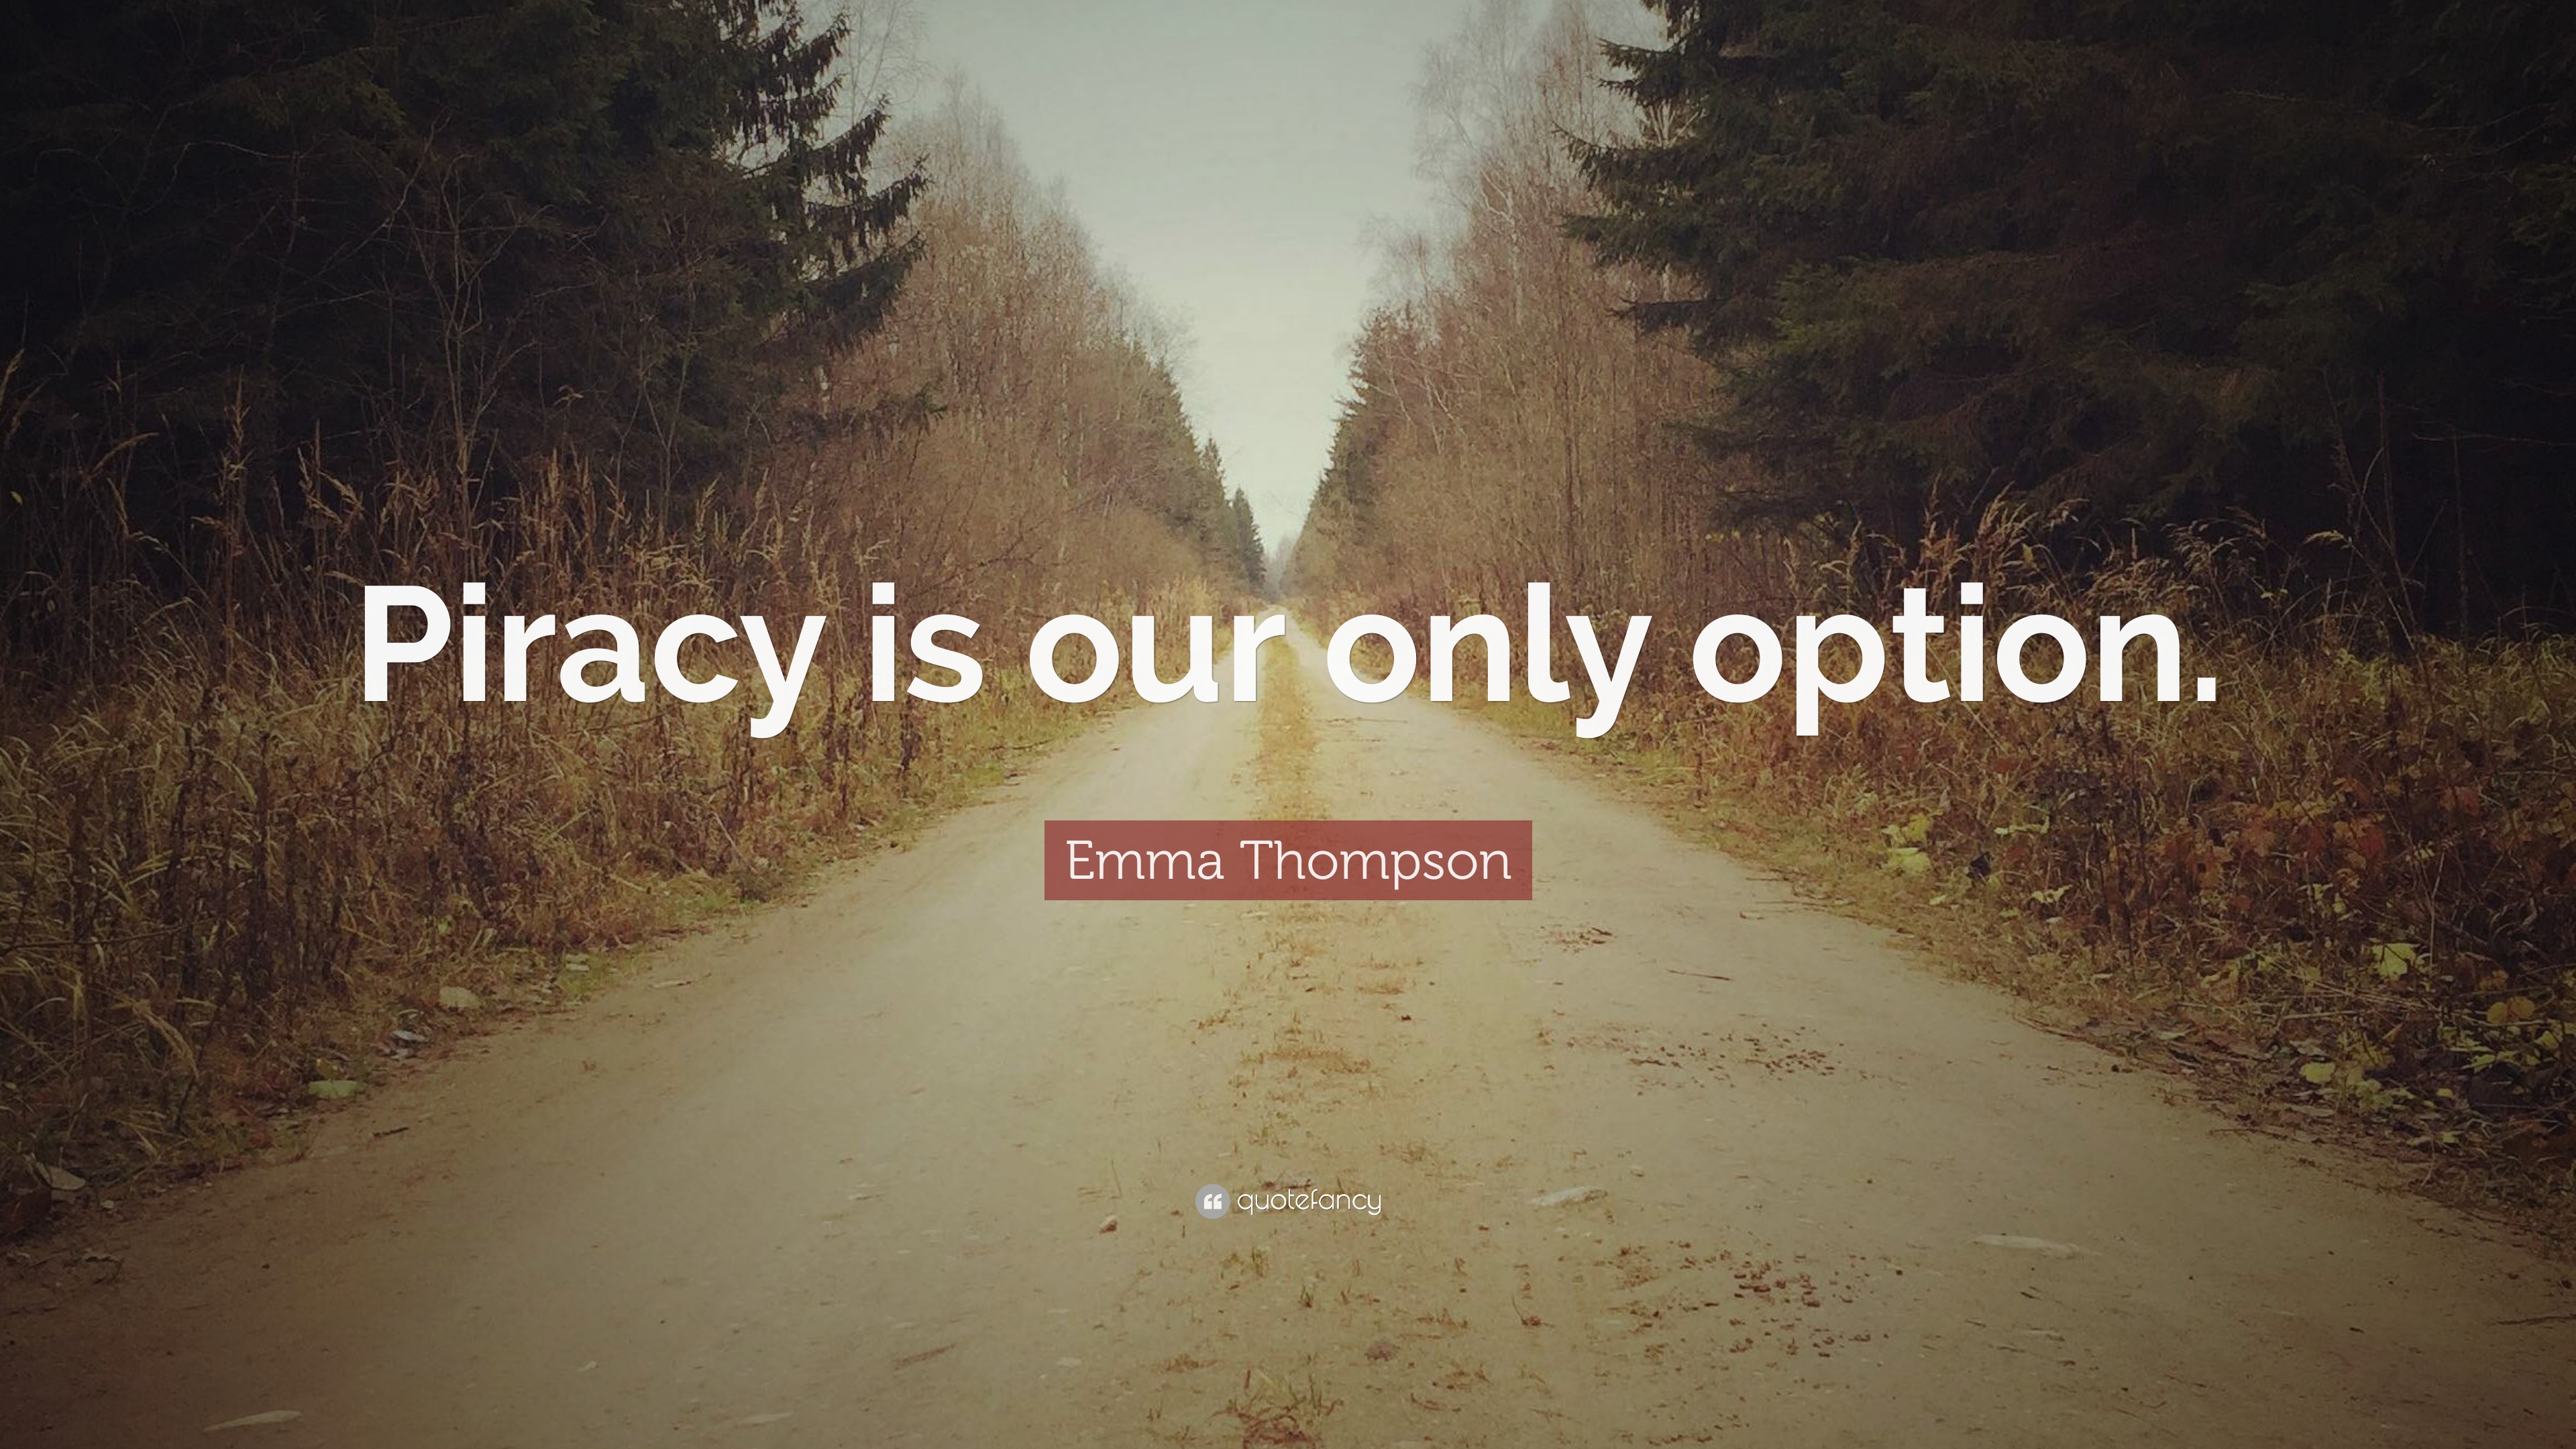 Emma Thompson Quote: “Piracy is our only option.” 7 wallpaper